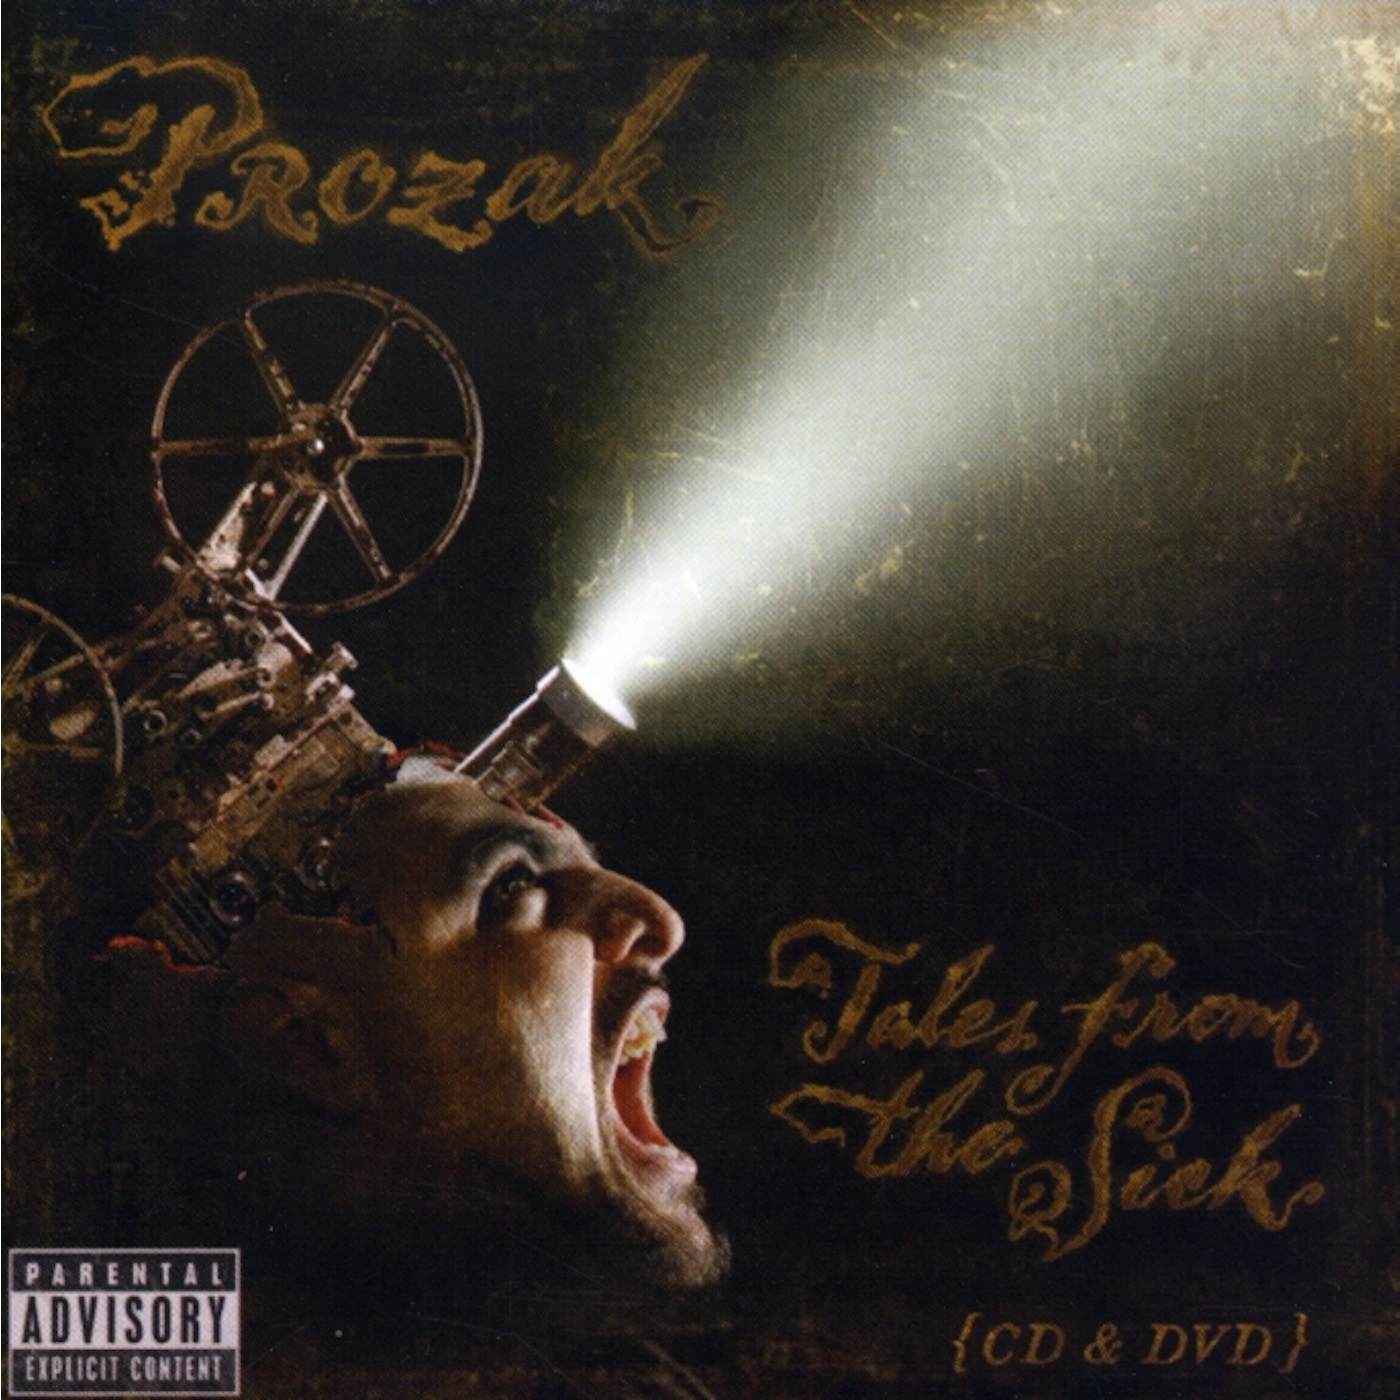 Prozak TALES FROM THE SICK CD